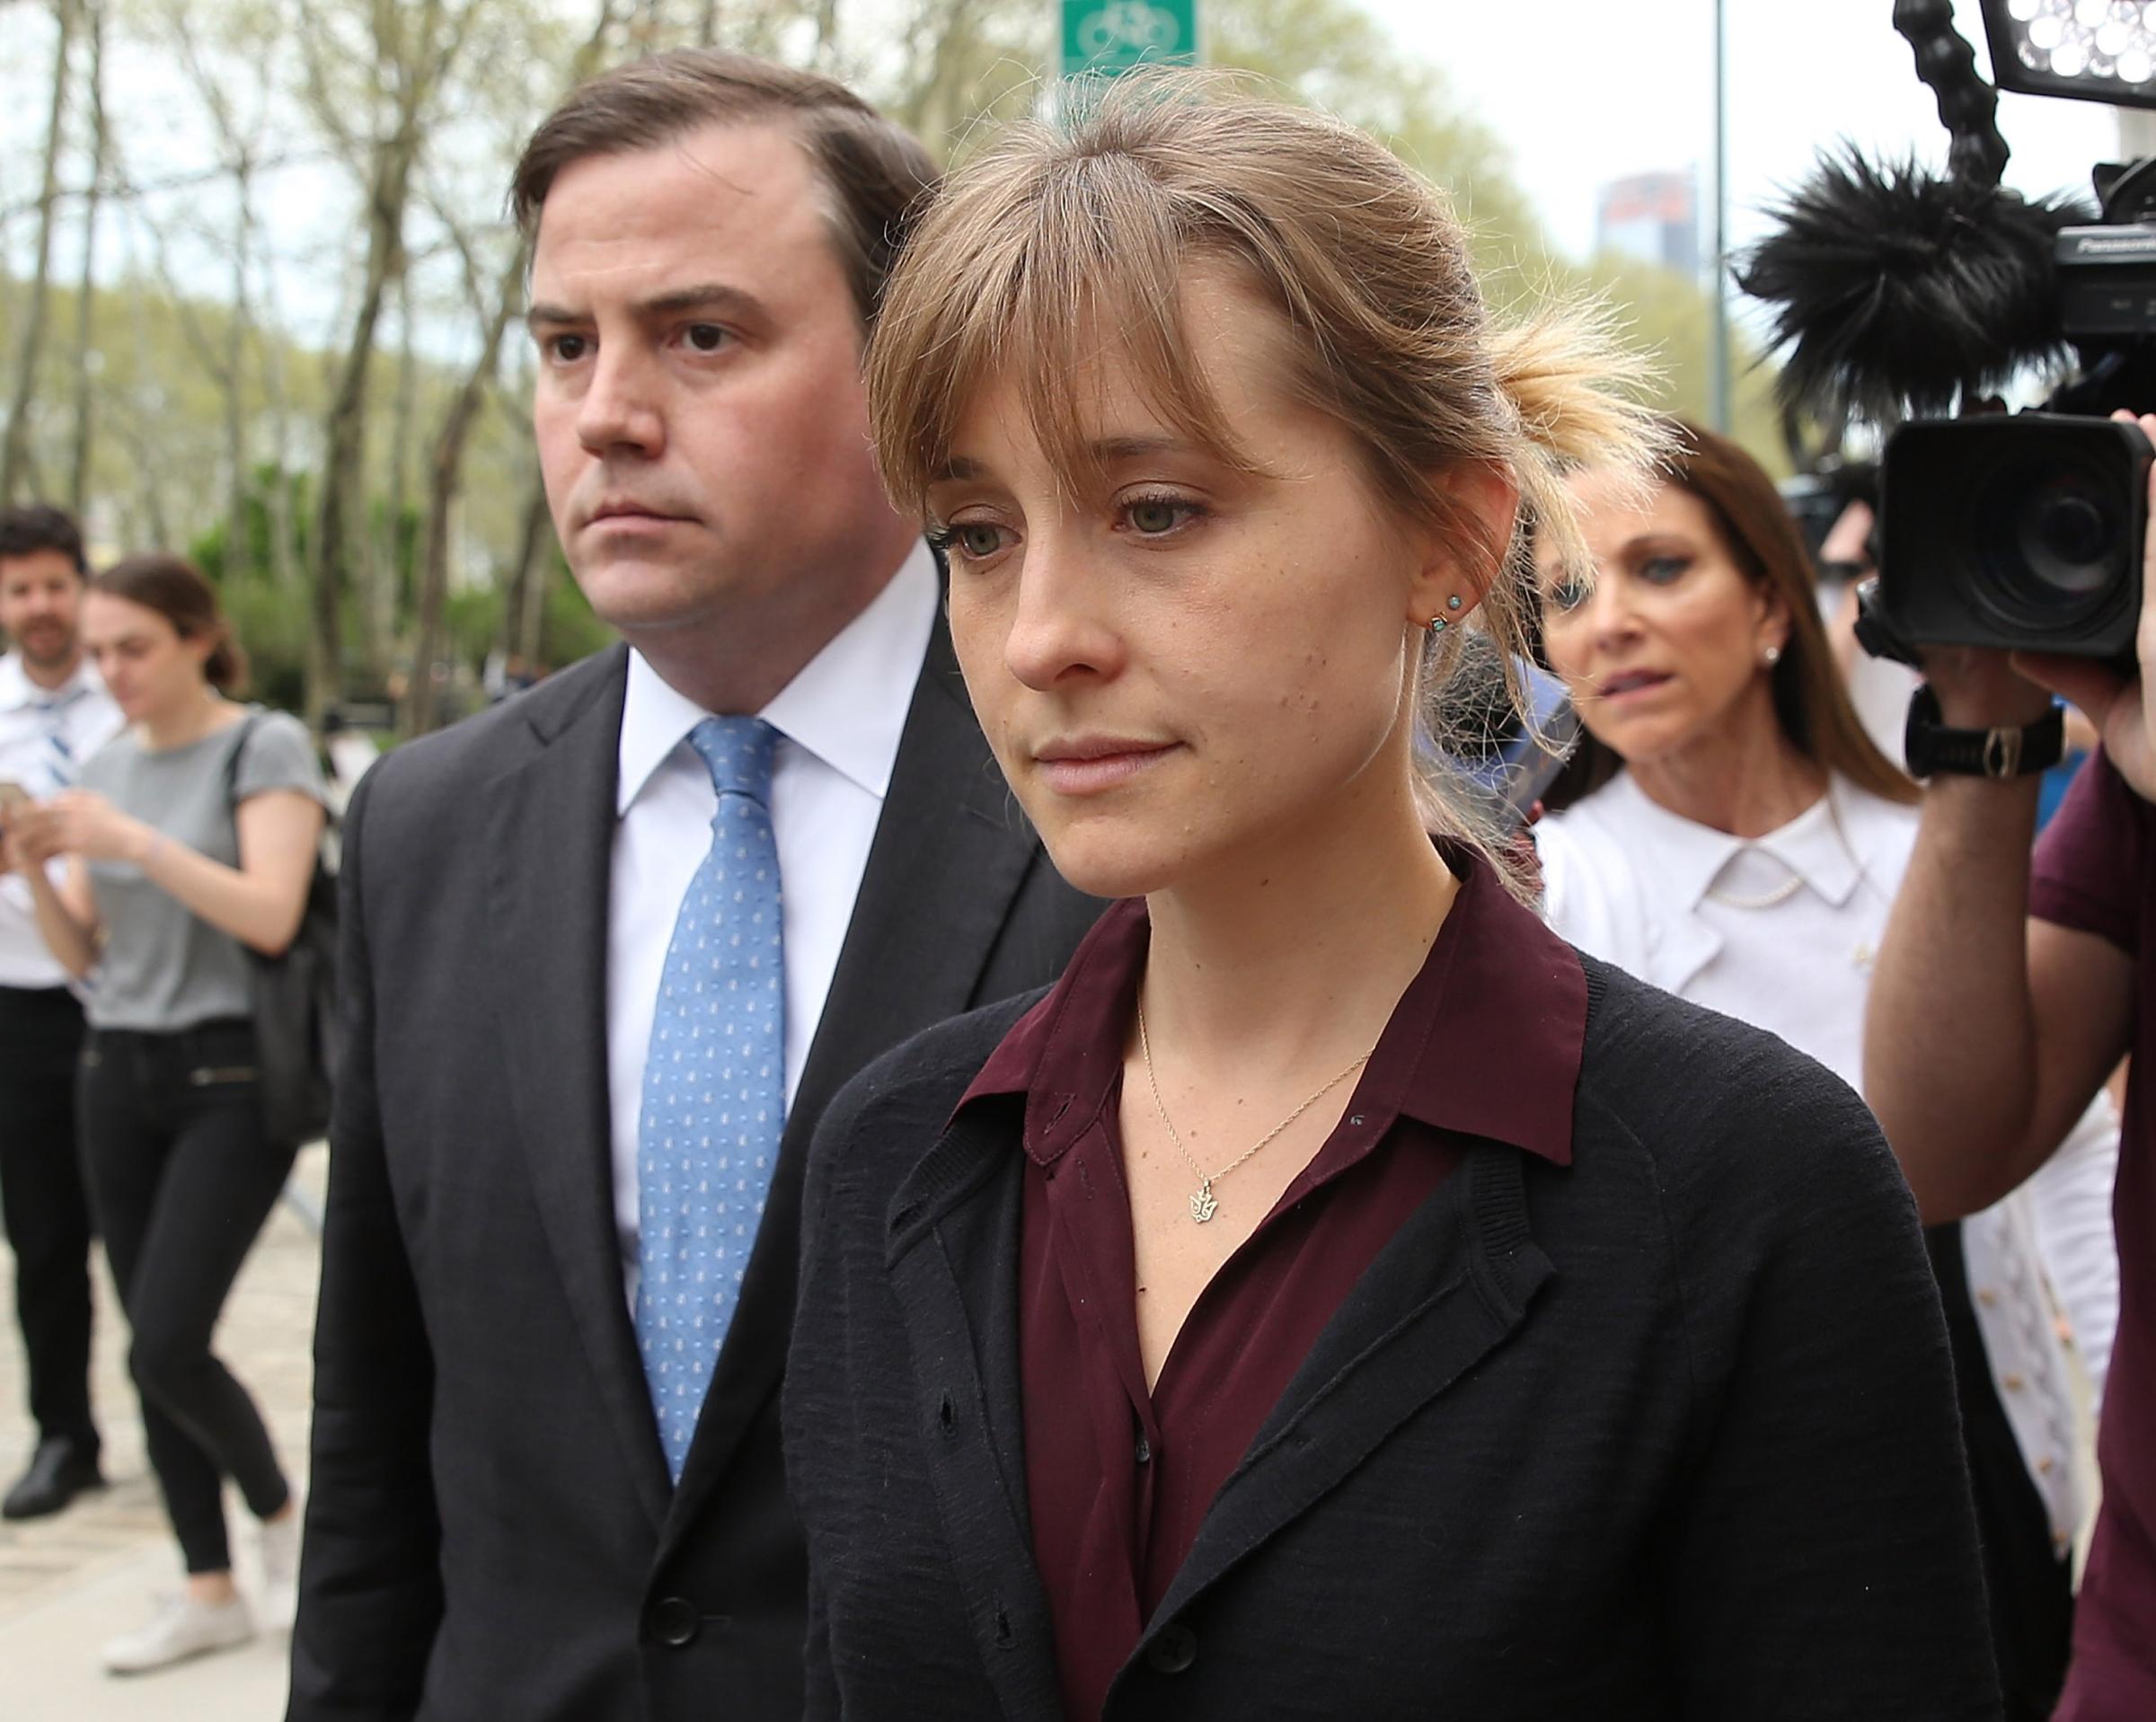 Actress Allison Mack Arrives At Court Over Sex Trafficking Charges